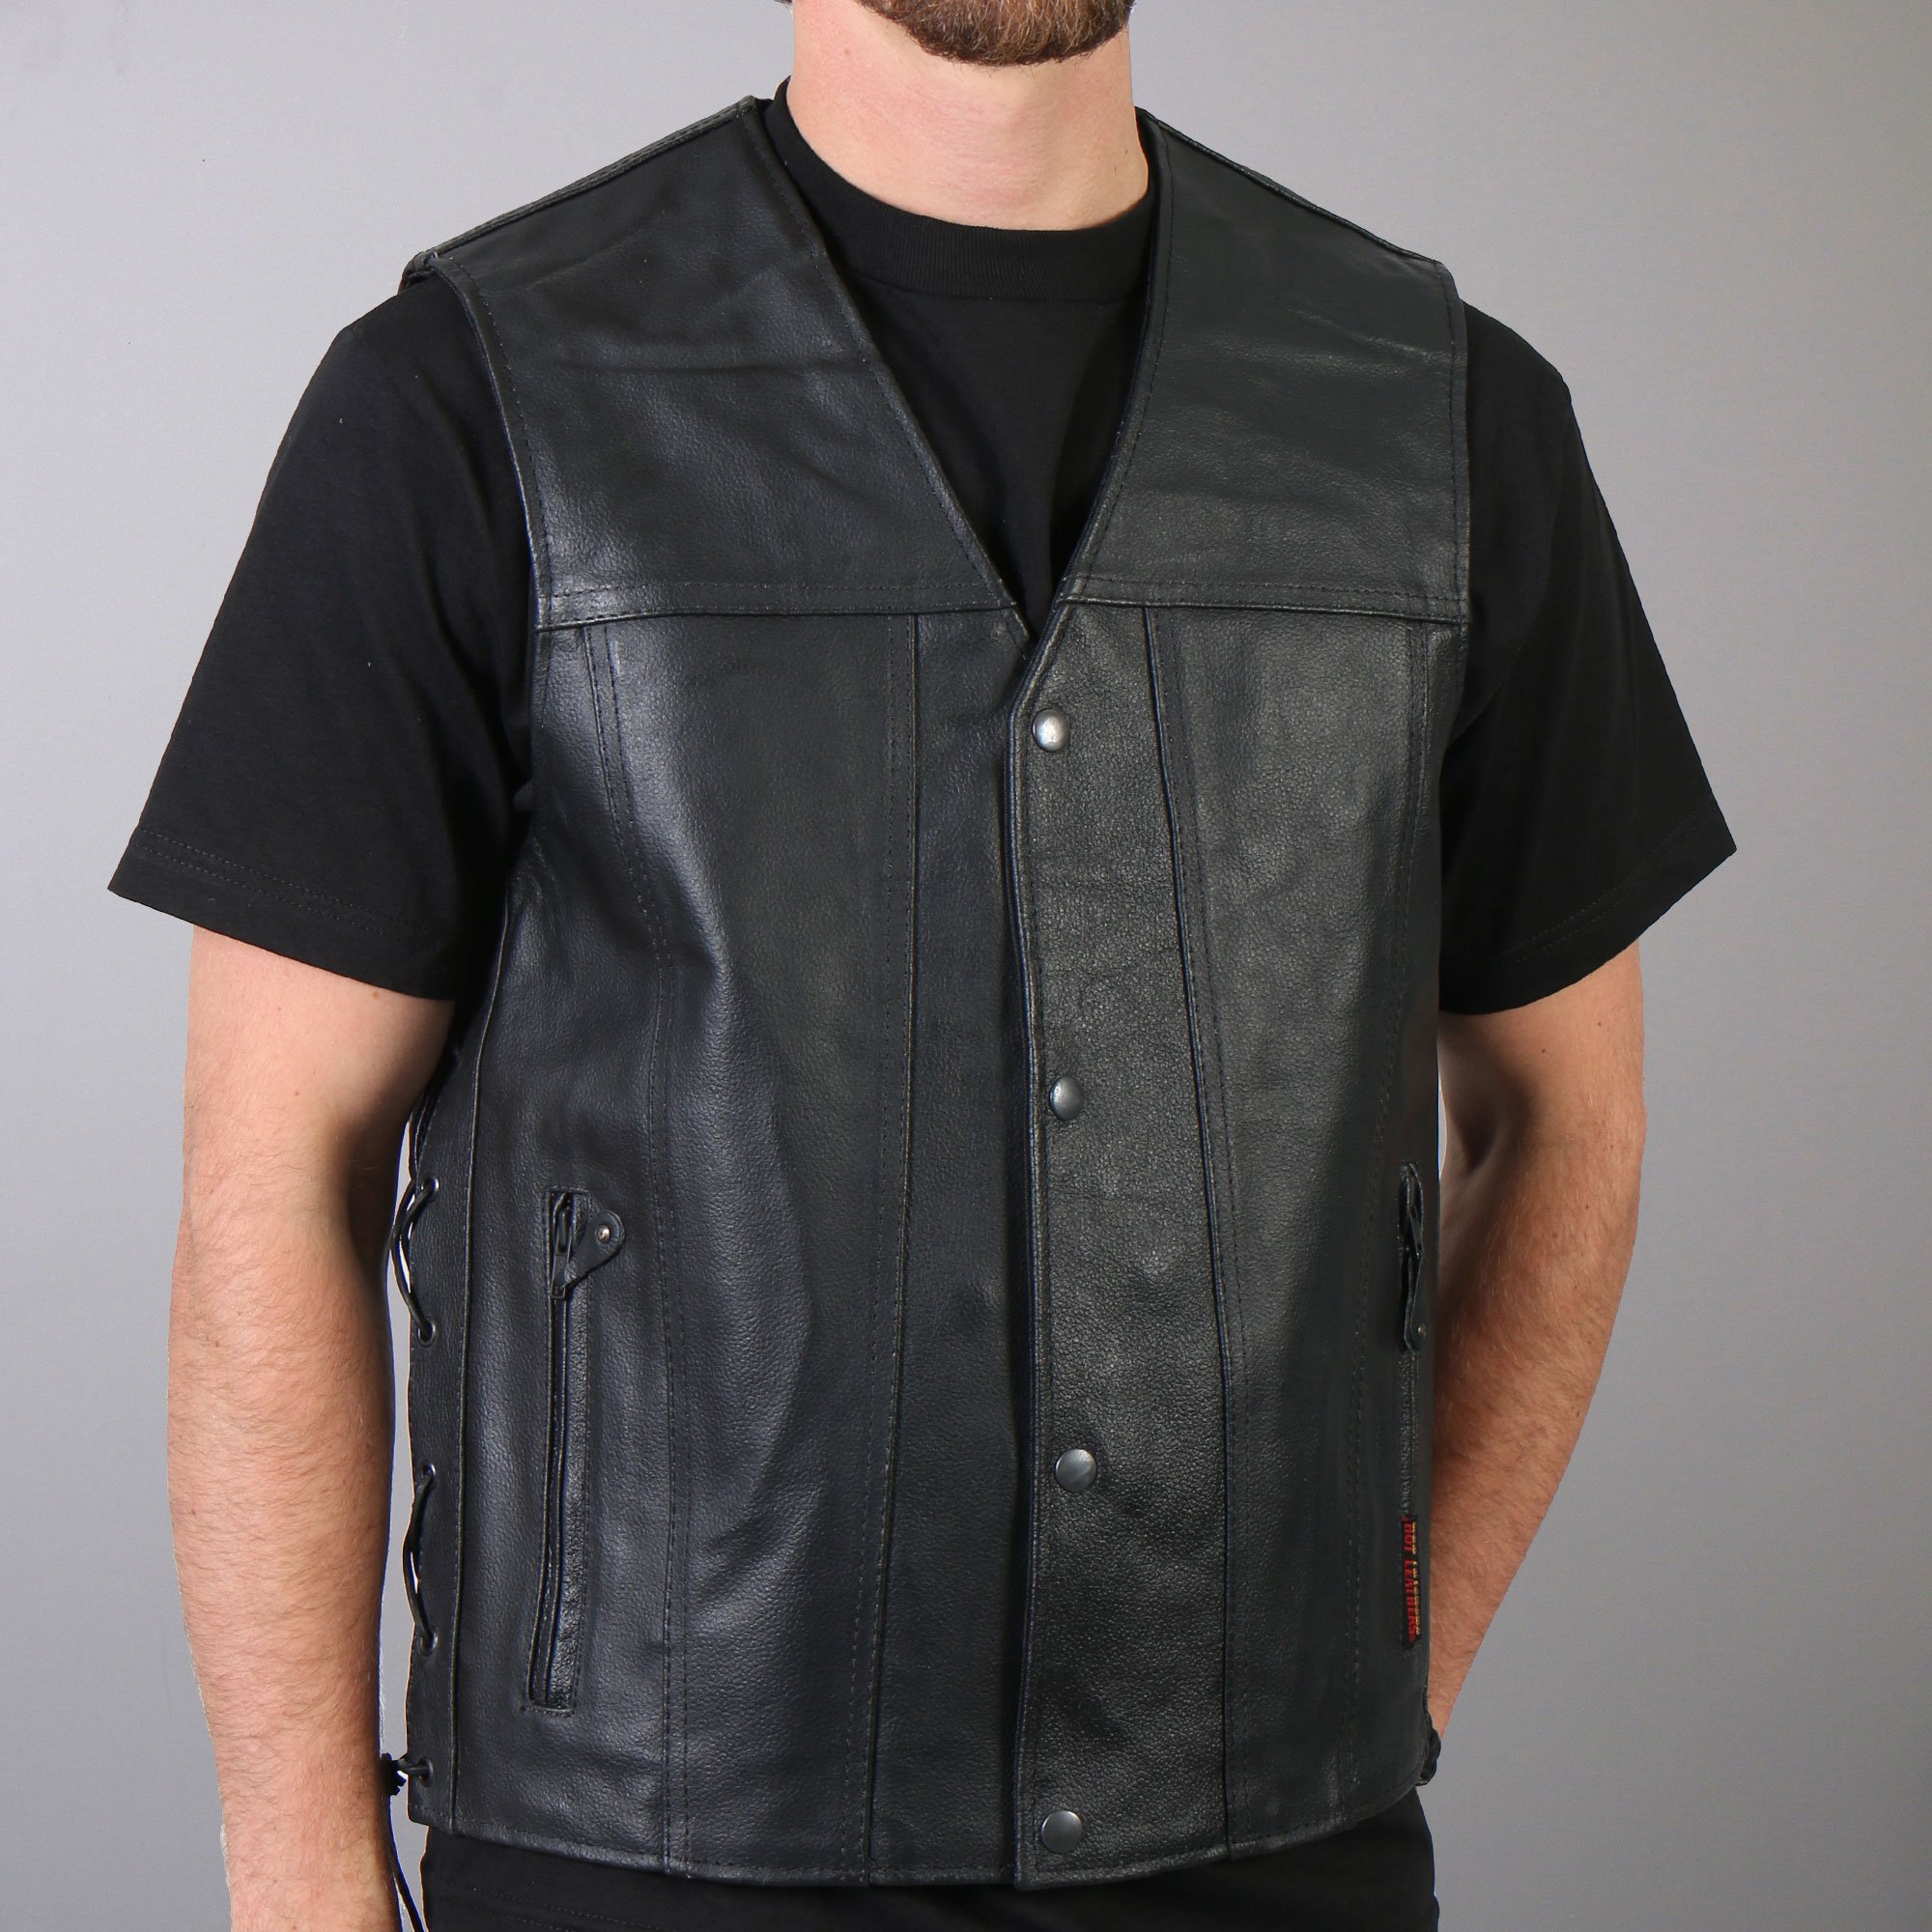 hot leathers menu0027s concealed carry leather vest w/ lace up sides aaqgvri